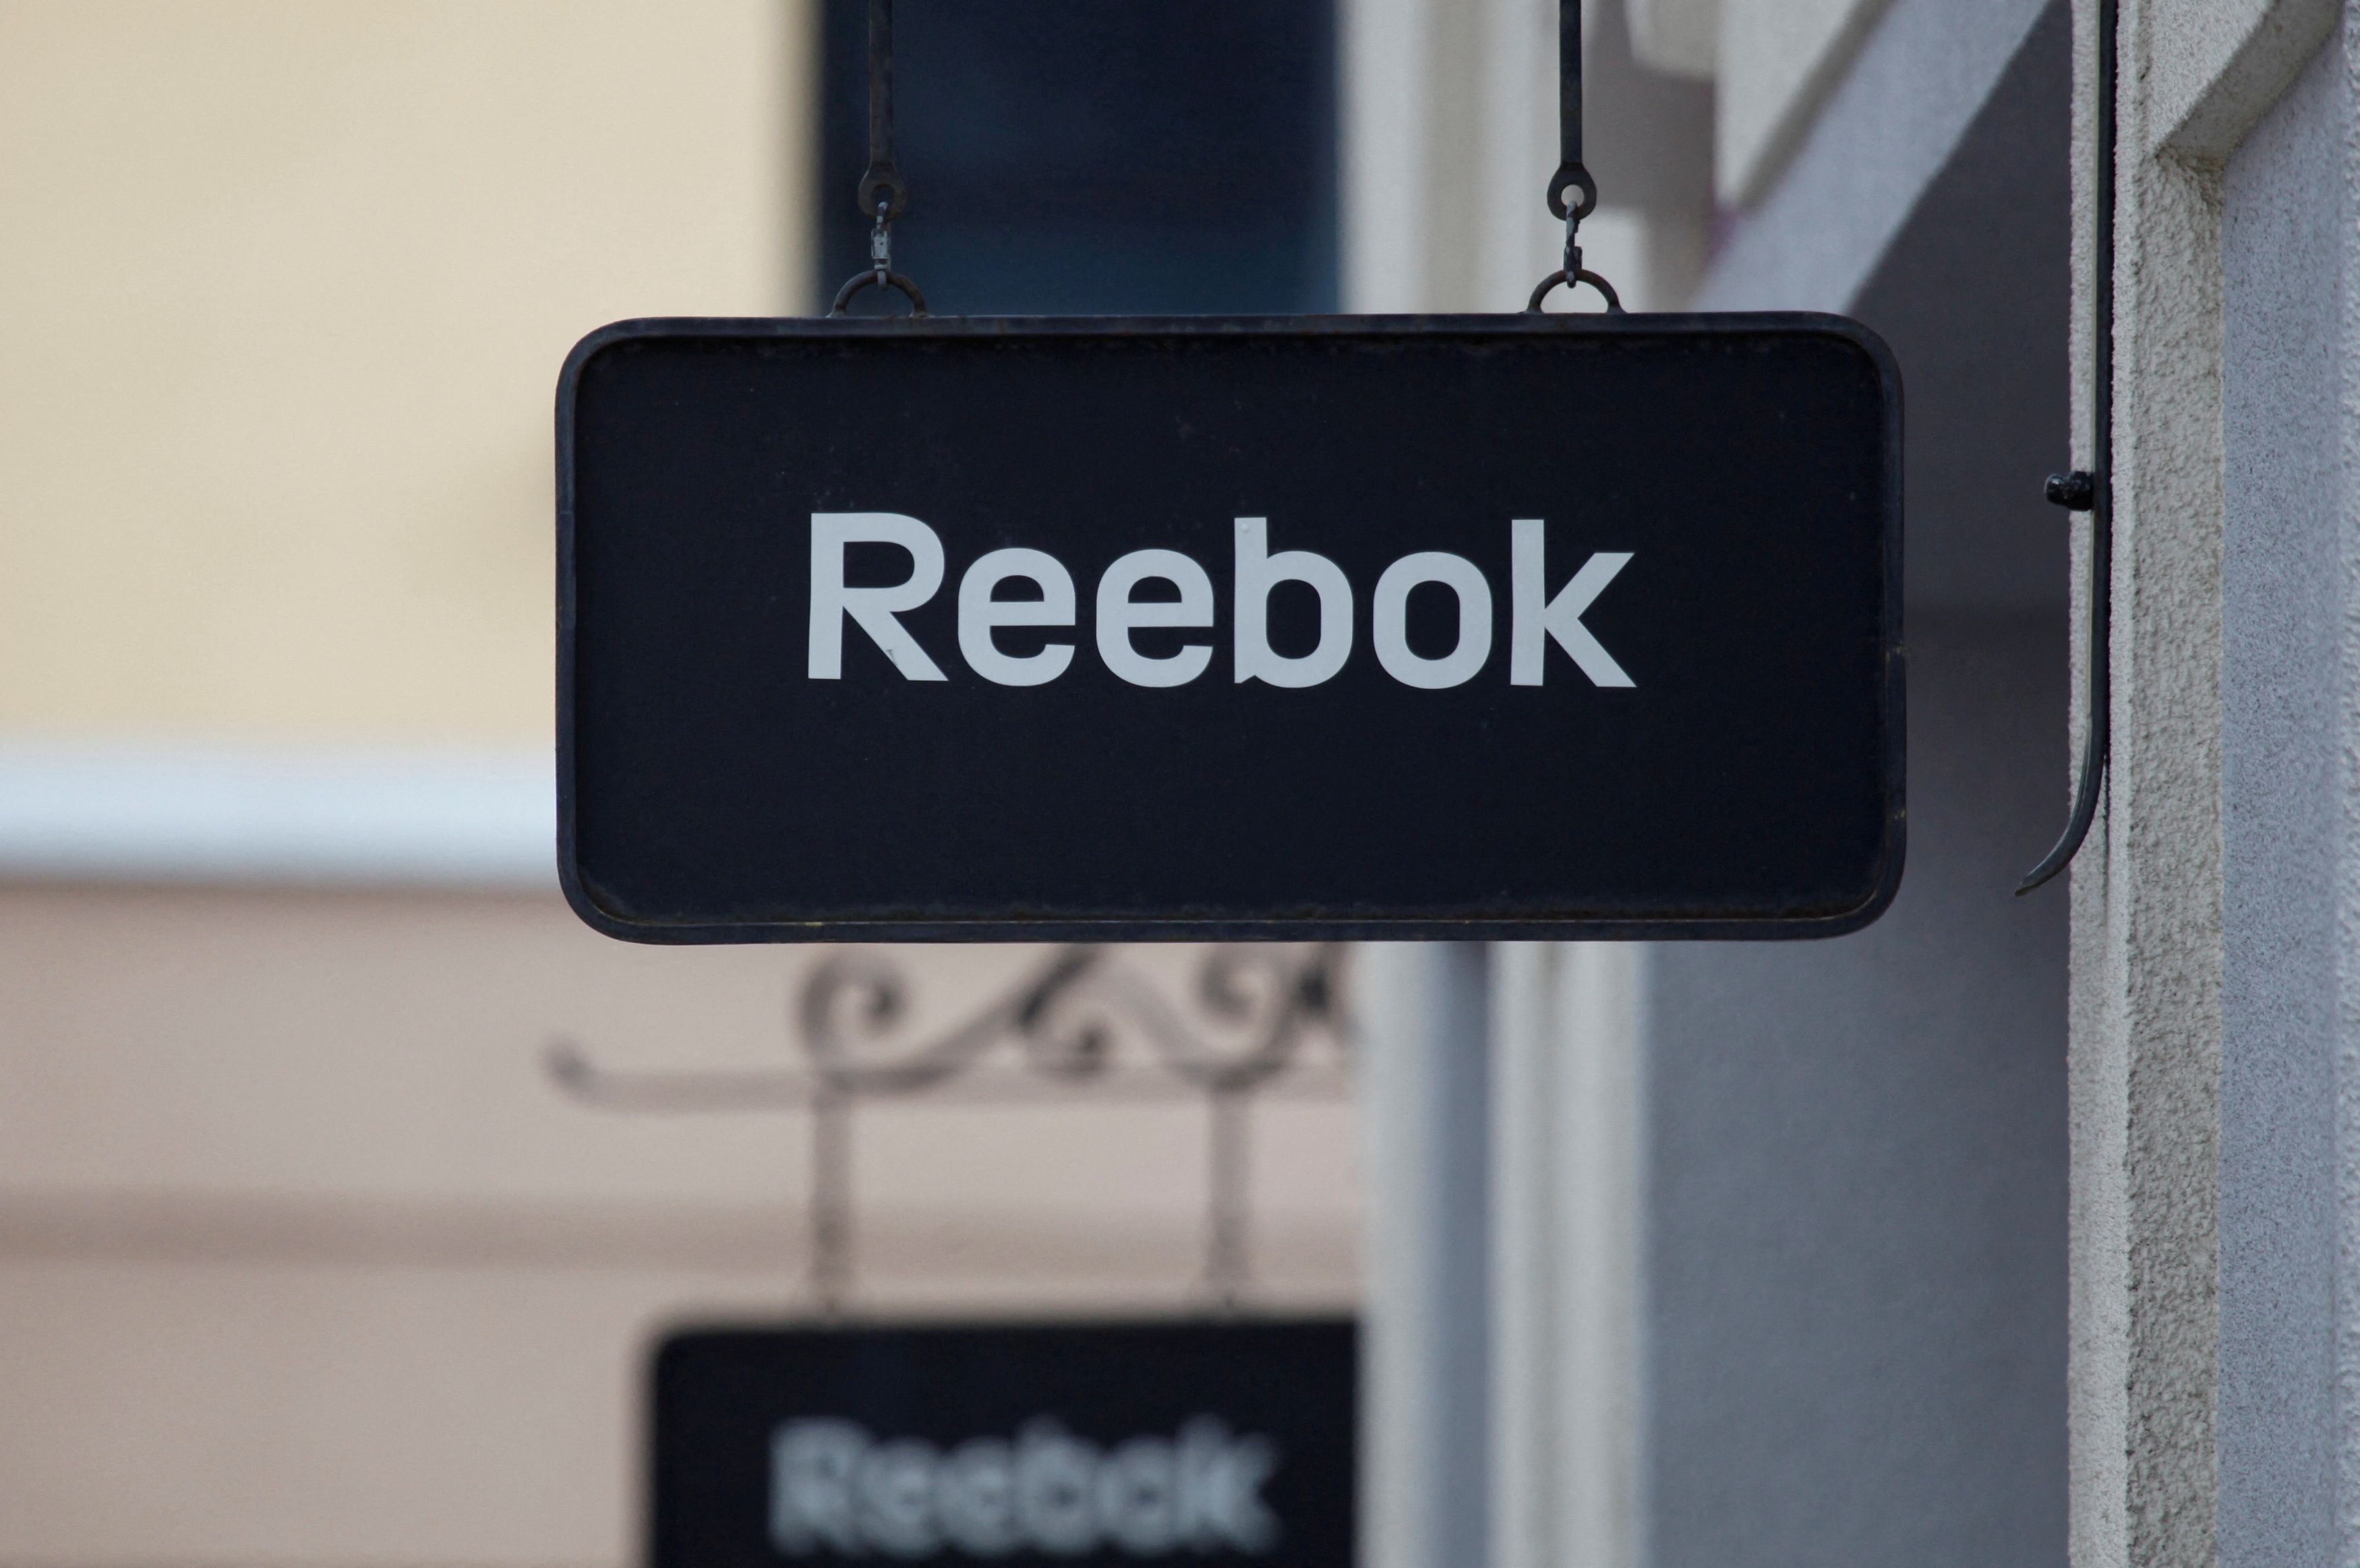 FLO in talks to take Reebok's stores in Russia Reuters